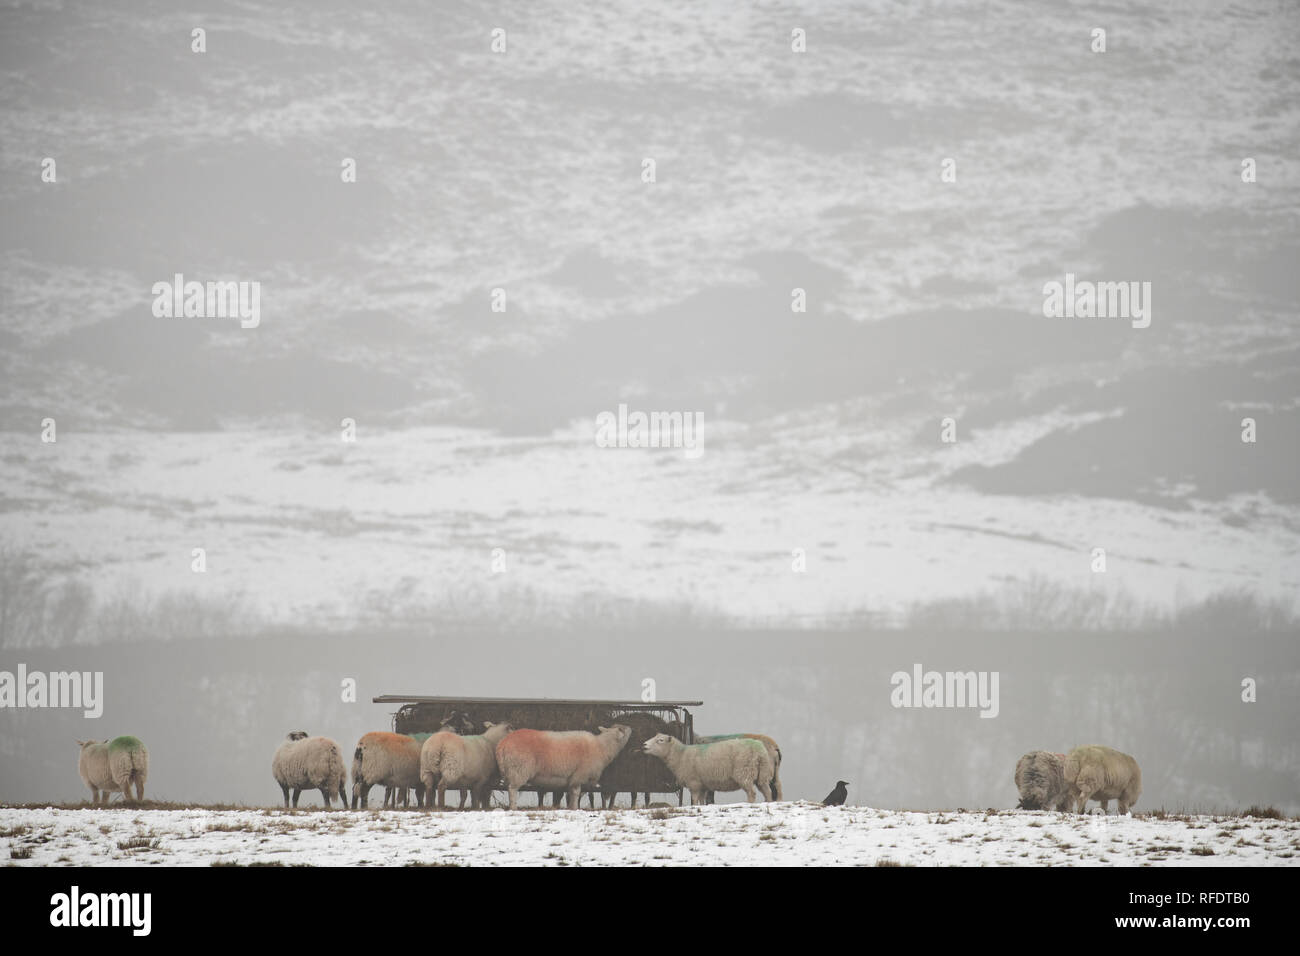 Sheep feeding in the snow on Kirkby Moor near Ulverston in Cumbria (UK)  Nikon D850, Nikkor 200-500 f5.6 @ 400mm, f=5.6, 1/400th Second, ISO64 Stock Photo